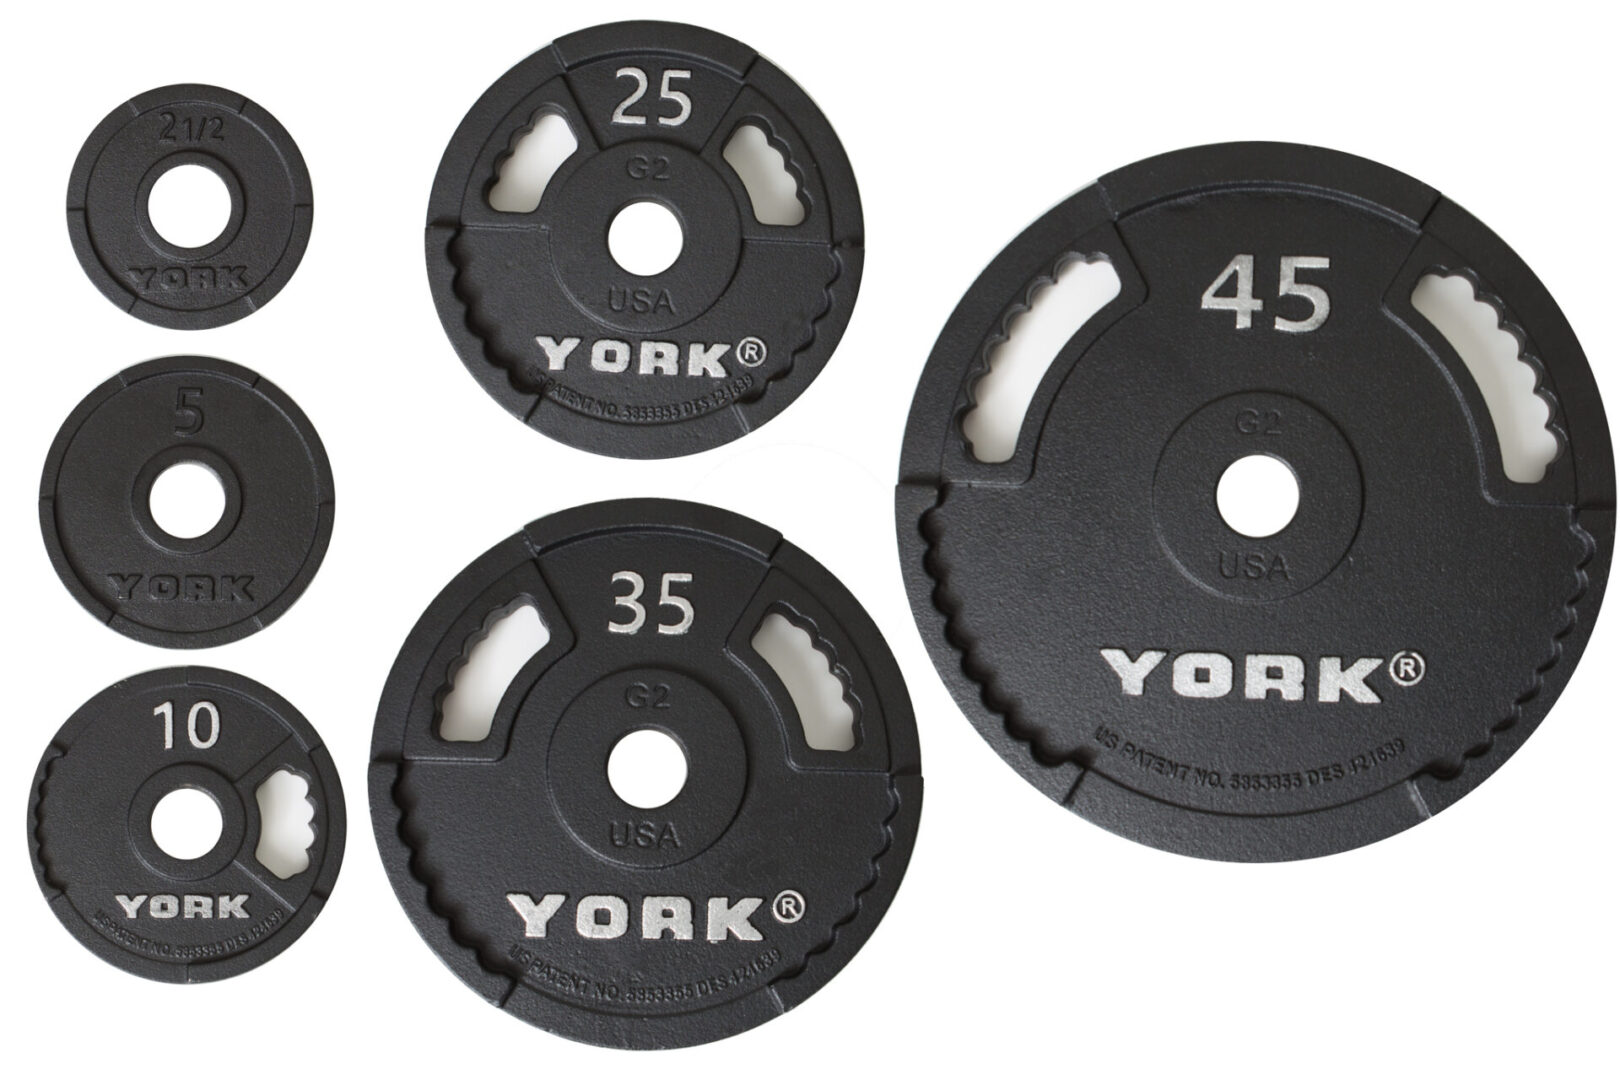 2 G-2 Cast Iron Olympic Weight Plate